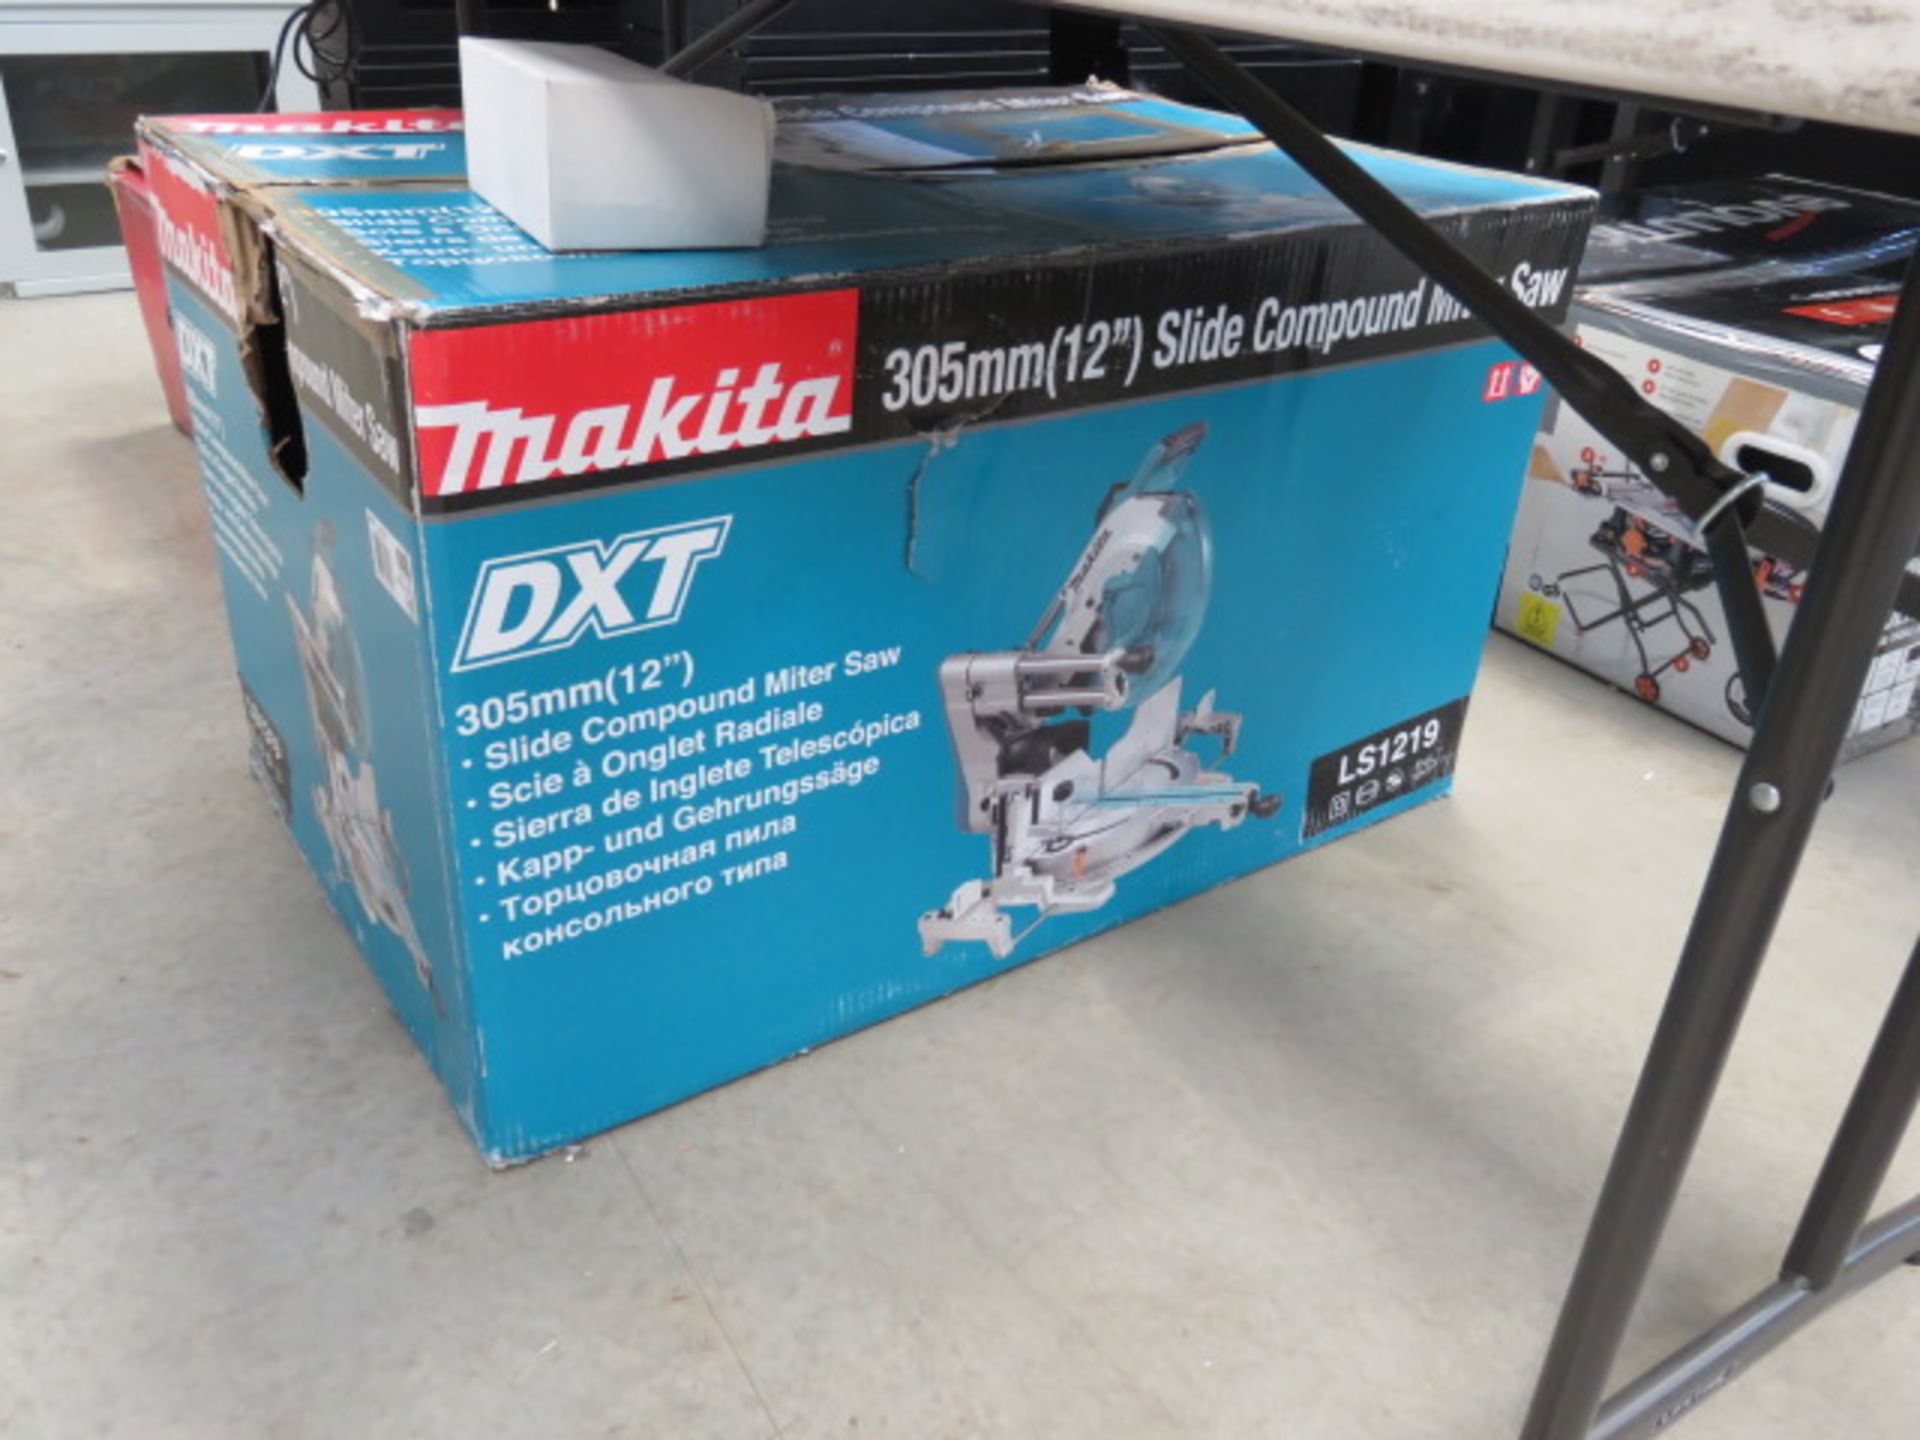 4150 Makita DXT 305mm slide compound mitre saw with box (cracked handle) - Image 2 of 8